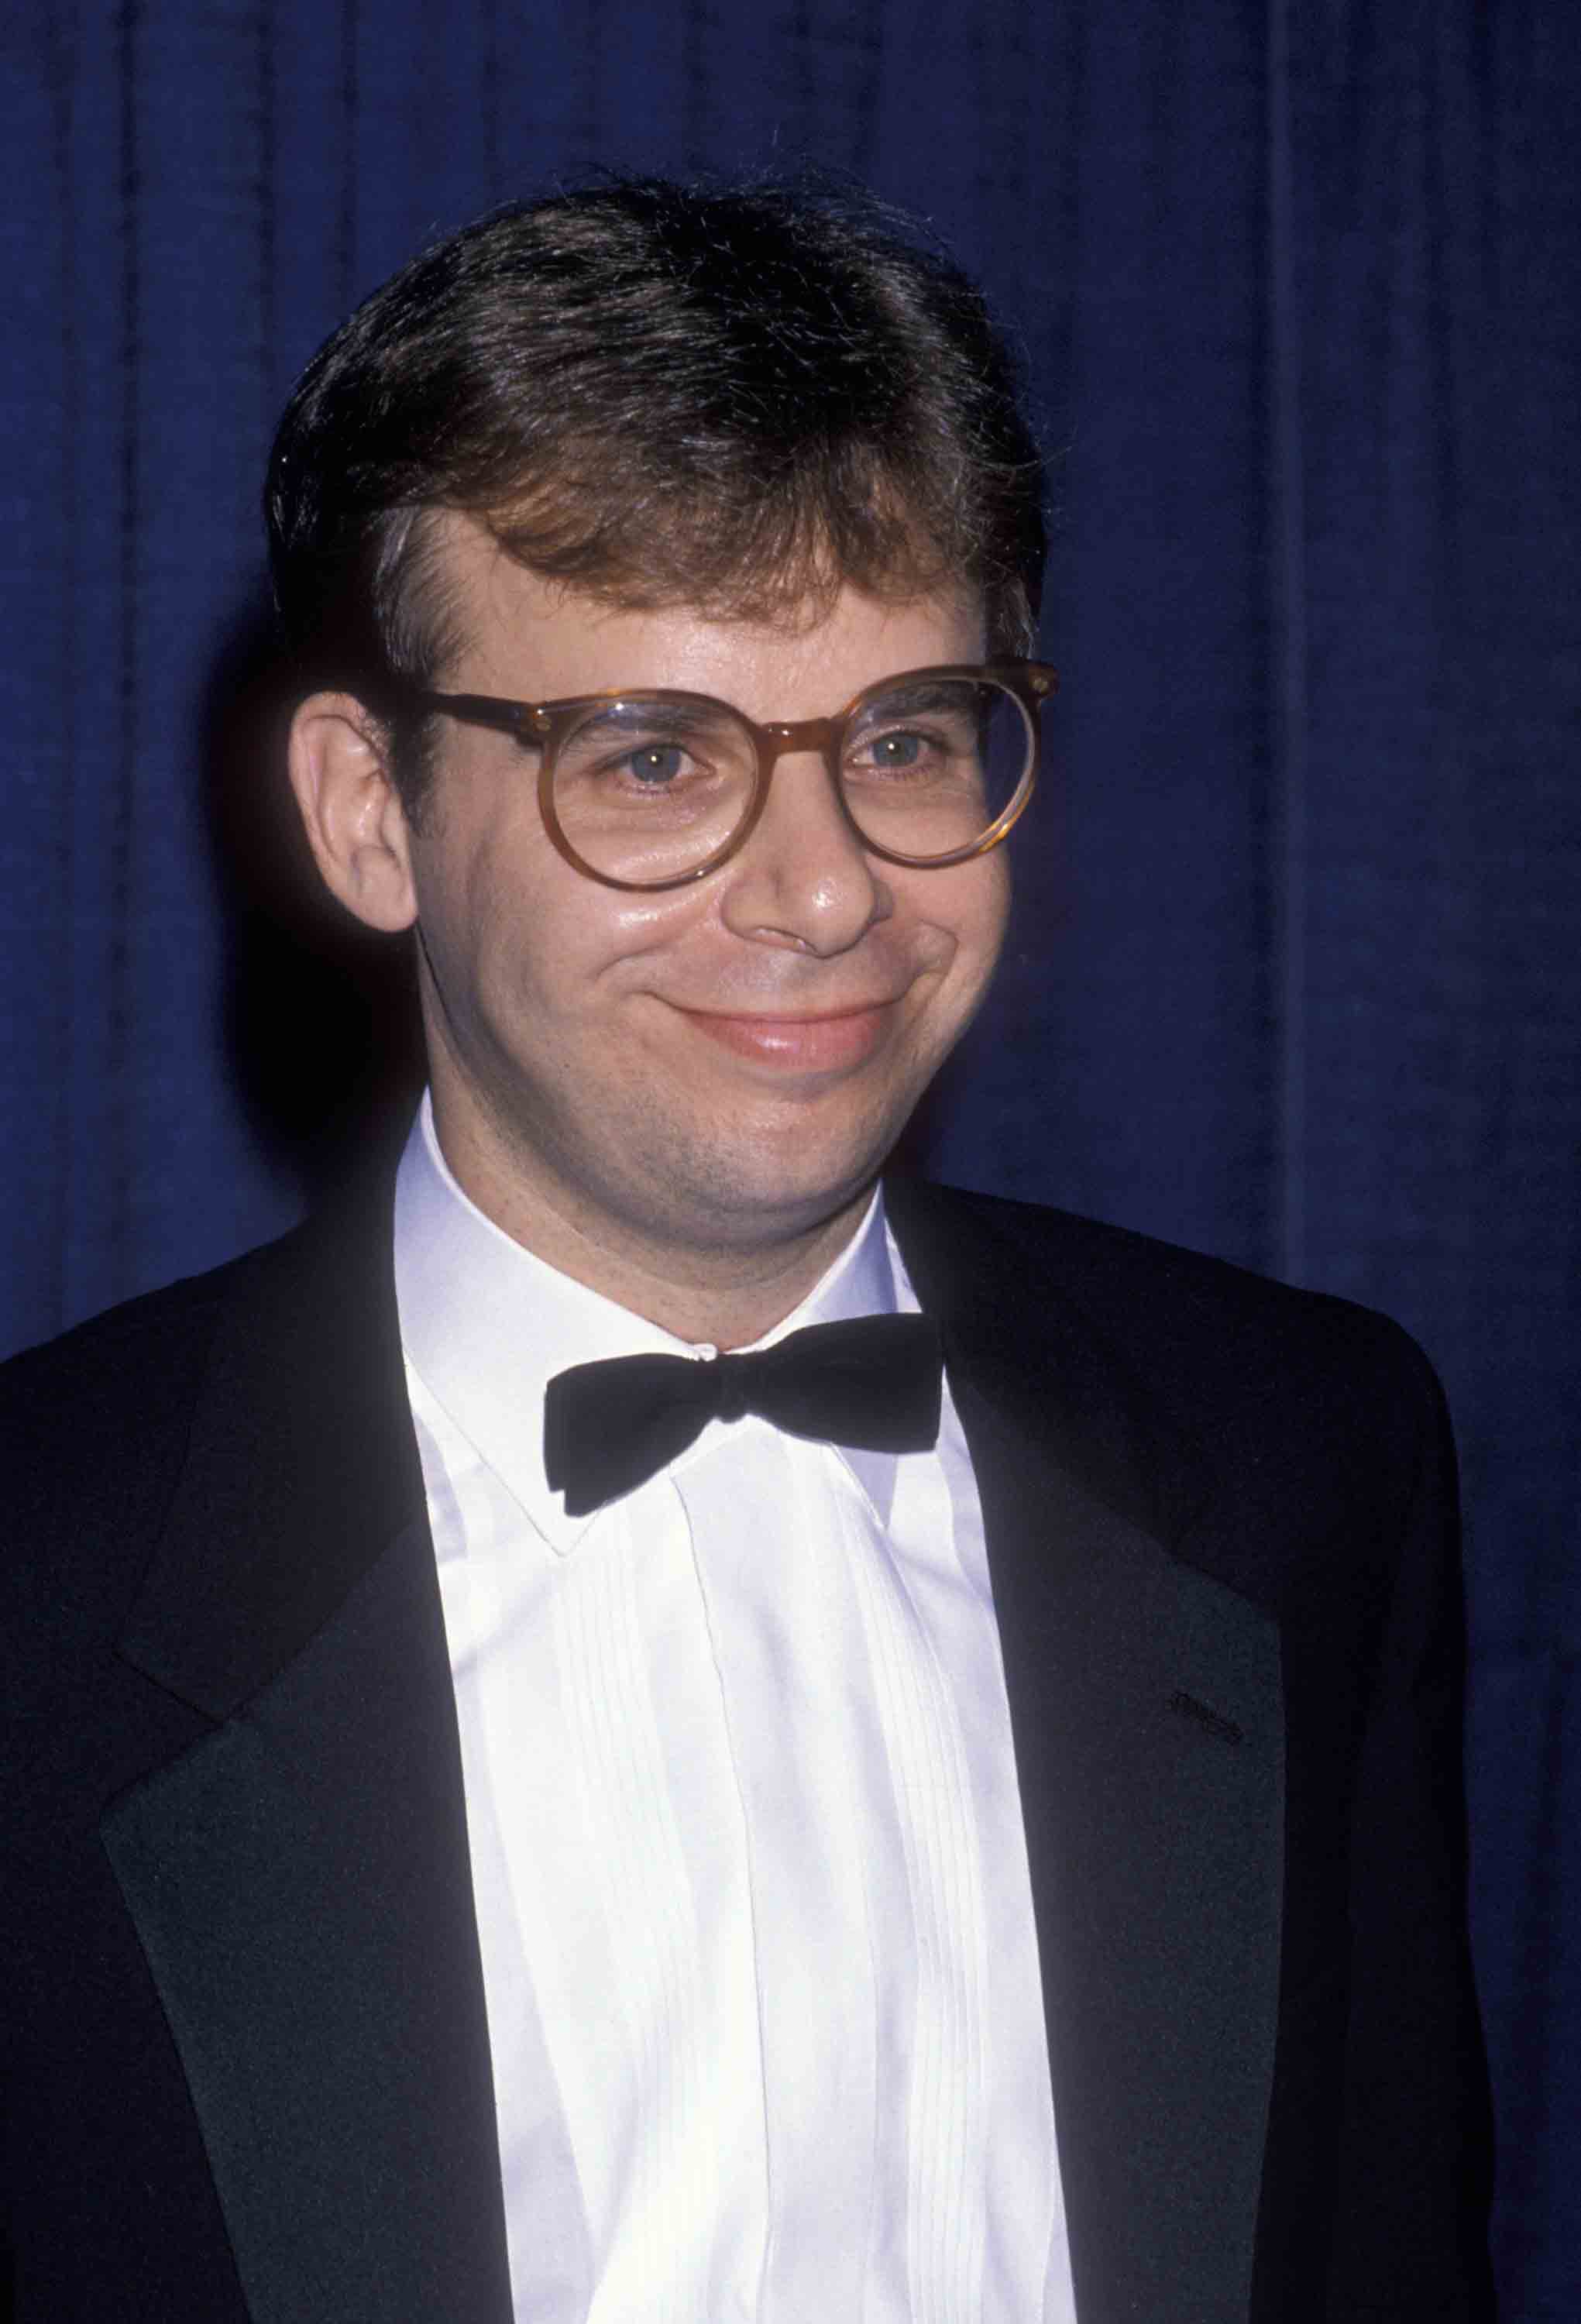 Rick Moranis attending the Fourth Annual Comedy Awards at the Shrine Auditorium on March 10, 1990 in Los Angeles, California. | Source: Getty Images